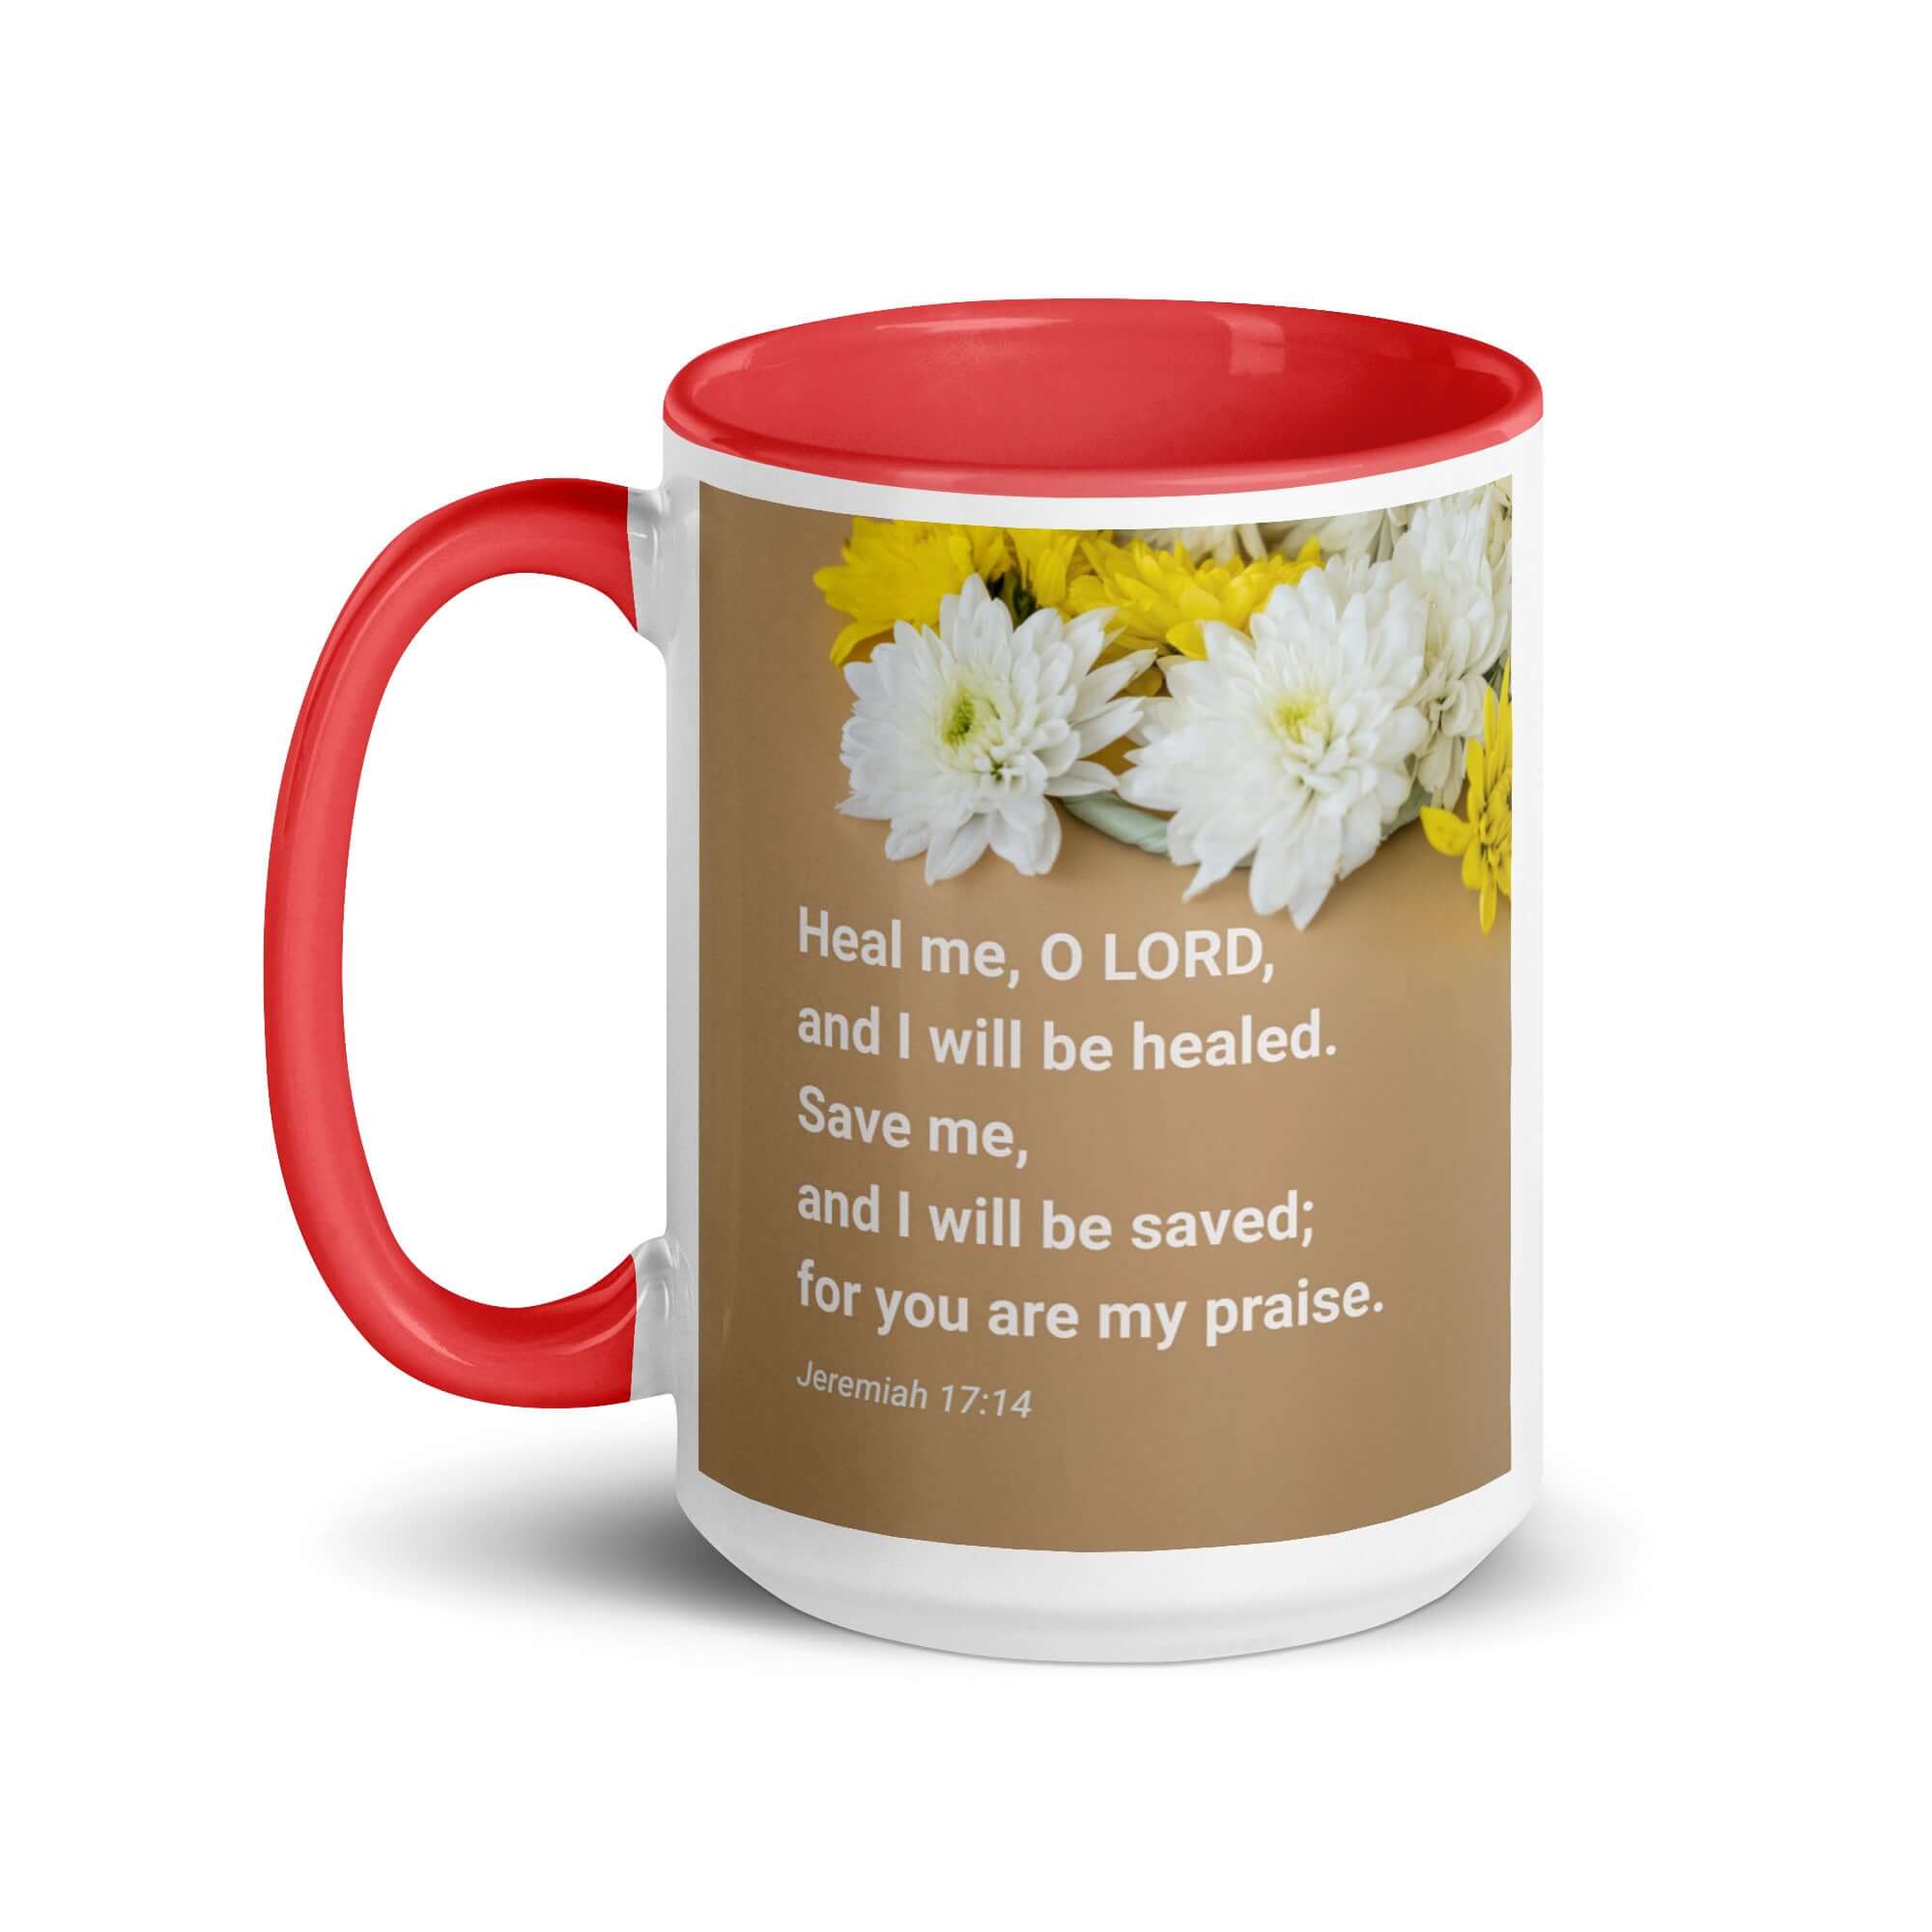 Jer 17:14 - Bible Verse, Heal me, O LORD White Ceramic Mug with Color Inside